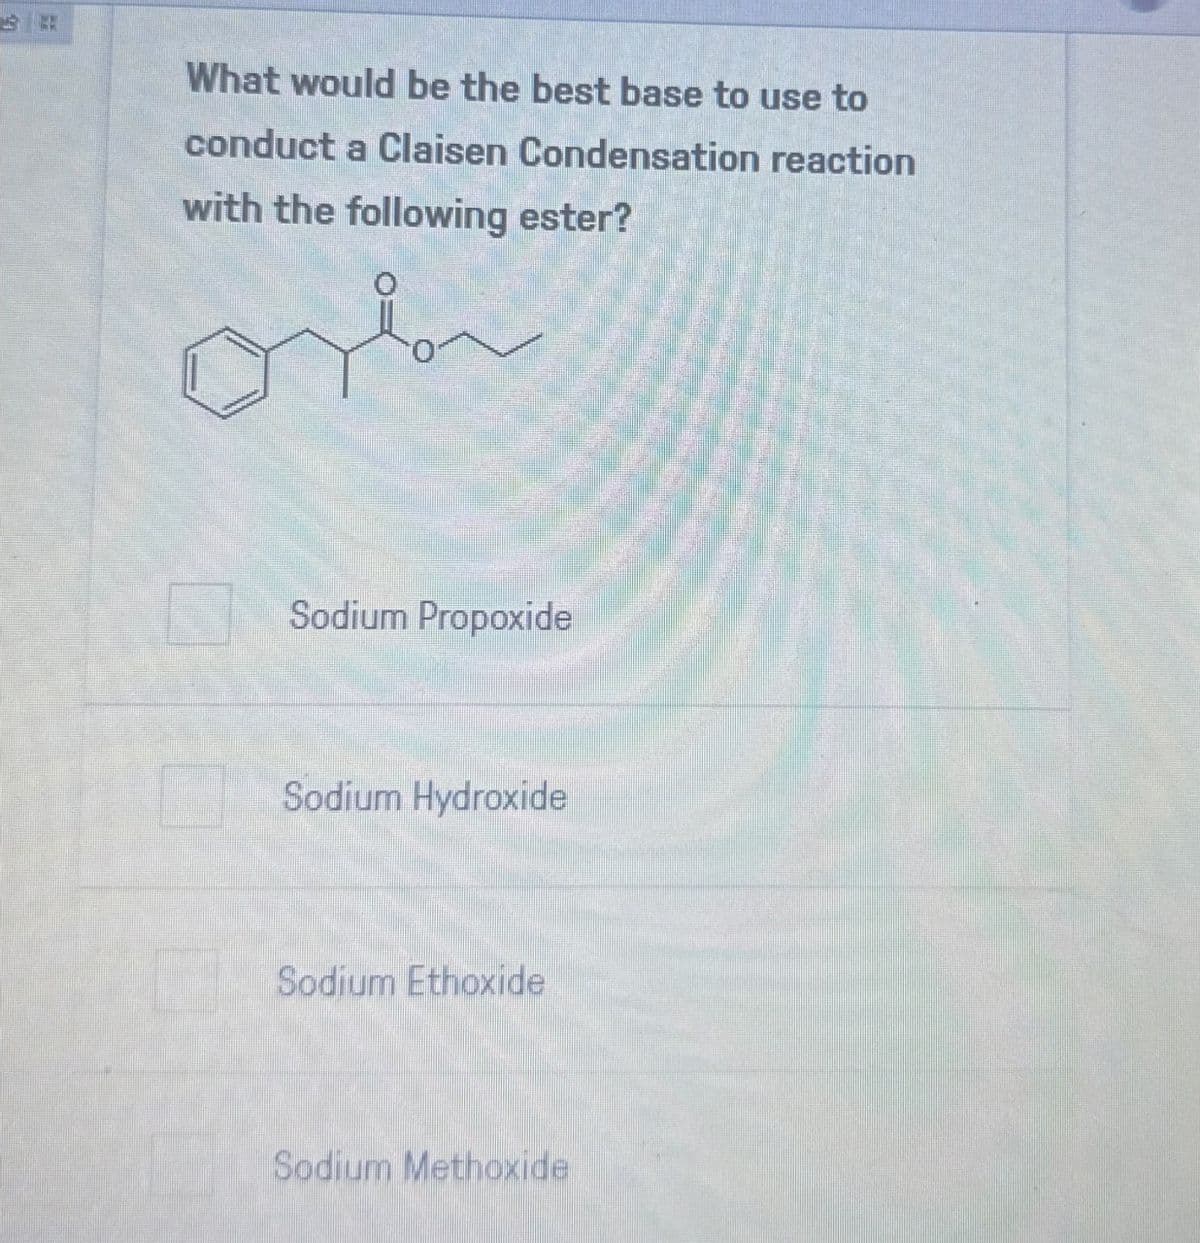 What would be the best base to use to
conduct a Claisen Condensation reaction
with the following ester?
Sodium Propoxide
Sodium Hydroxide
Sodium Ethoxide
Sodium Methoxide